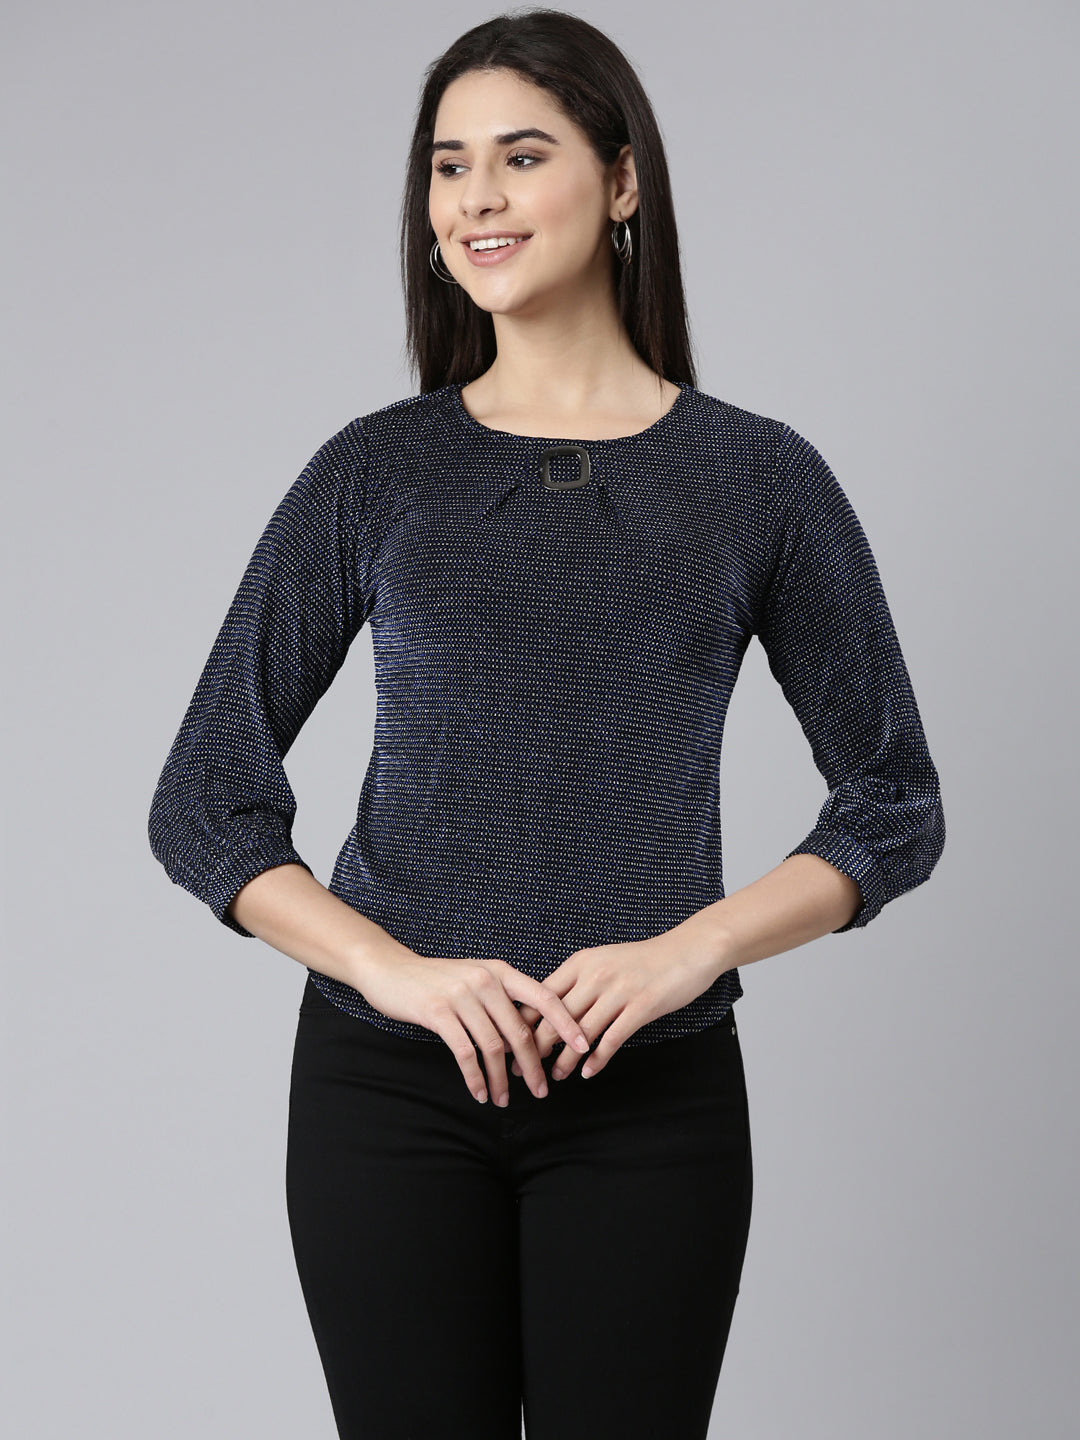 Round Neck Cuffed Sleeves Embellished Navy Blue Regular Top